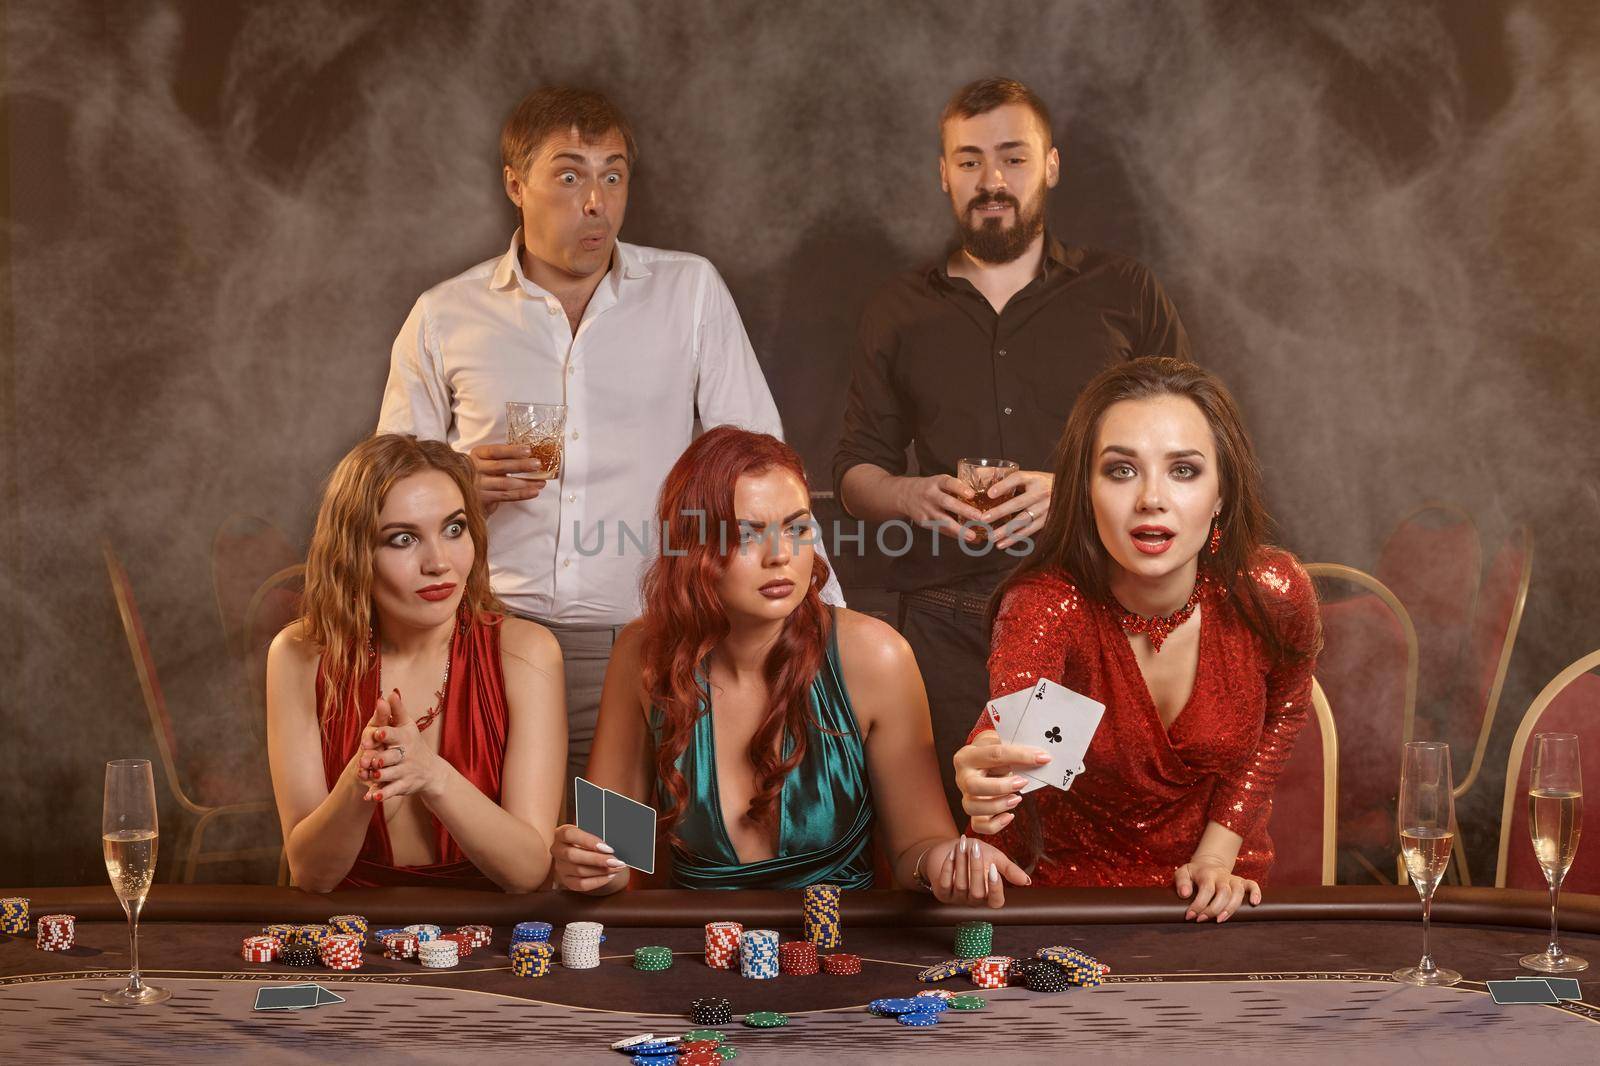 Agitated buddies are playing poker at casino. They are celebrating their win, smiling and posing at the table against a dark smoke background. Cards, chips, money, alcohol, fortune, gambling, entertainment concept.